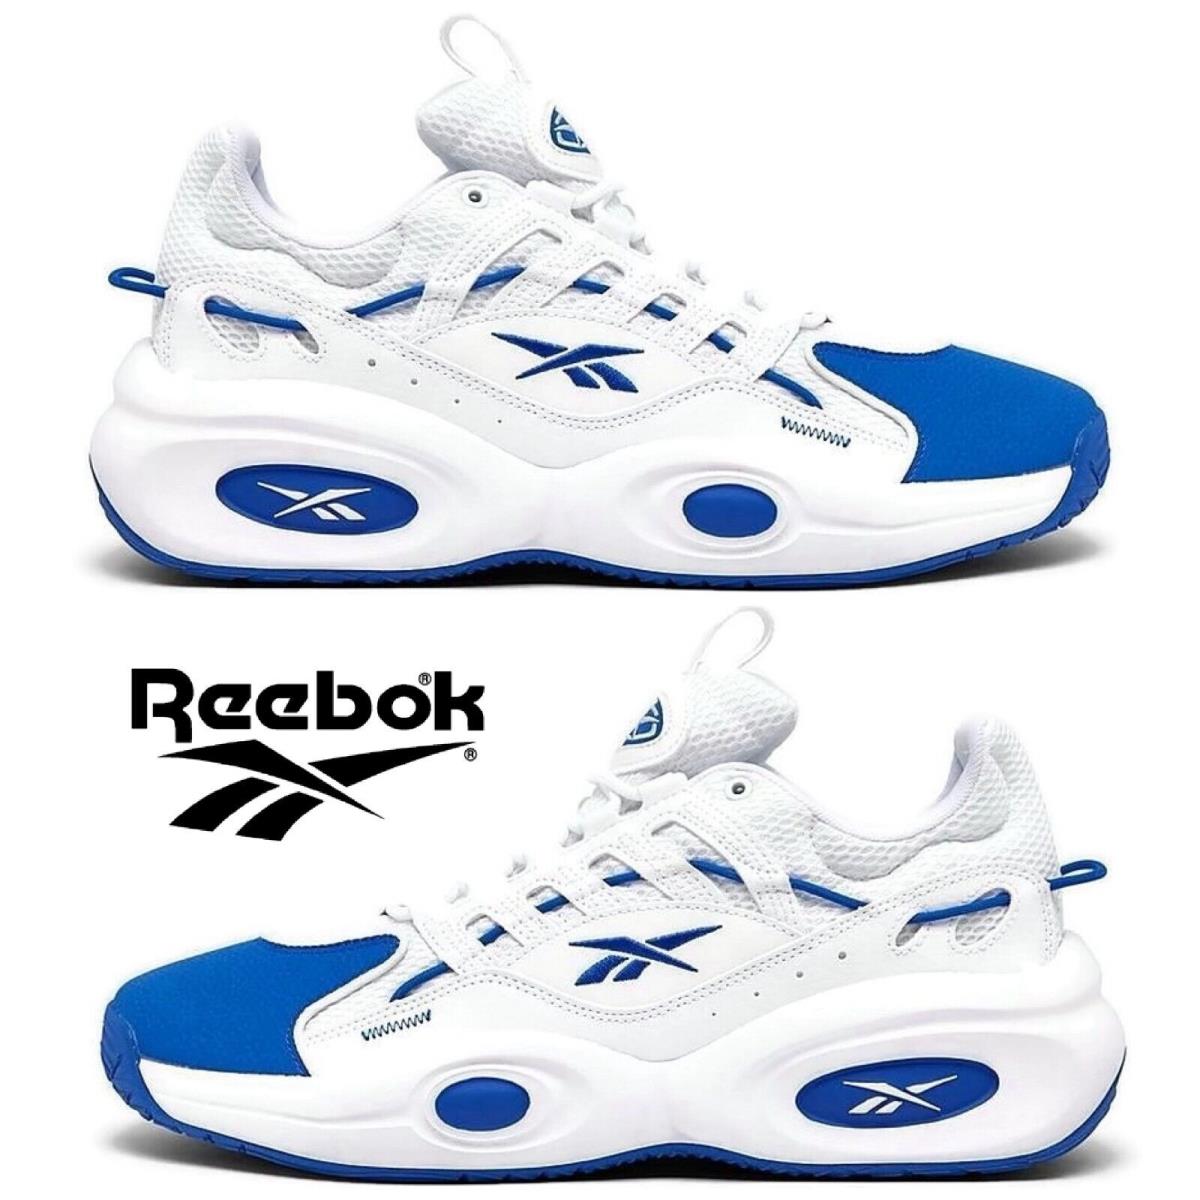 Reebok Solution Mid Basketball Shoes Men`s Sneakers Running Casual Sport White